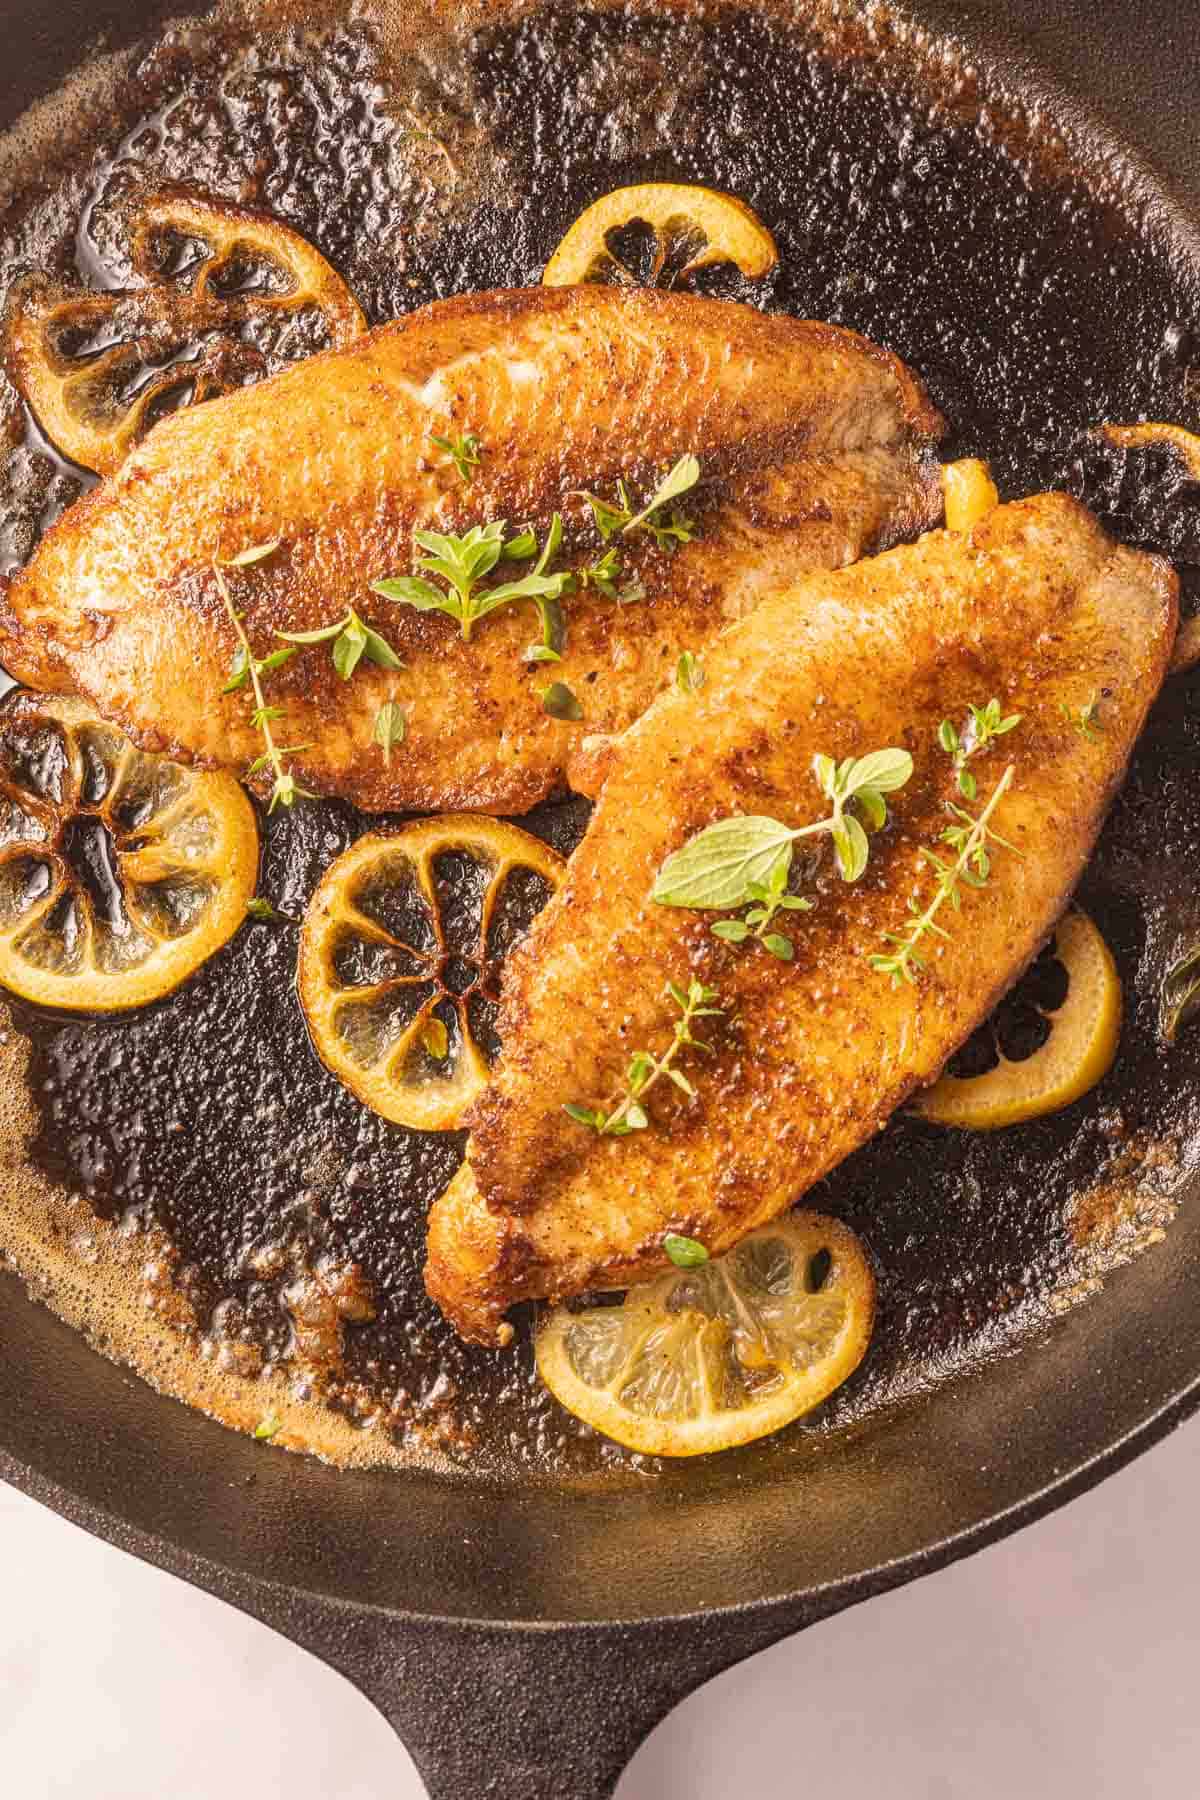 Blackened trout fillets in cast iron skillet.